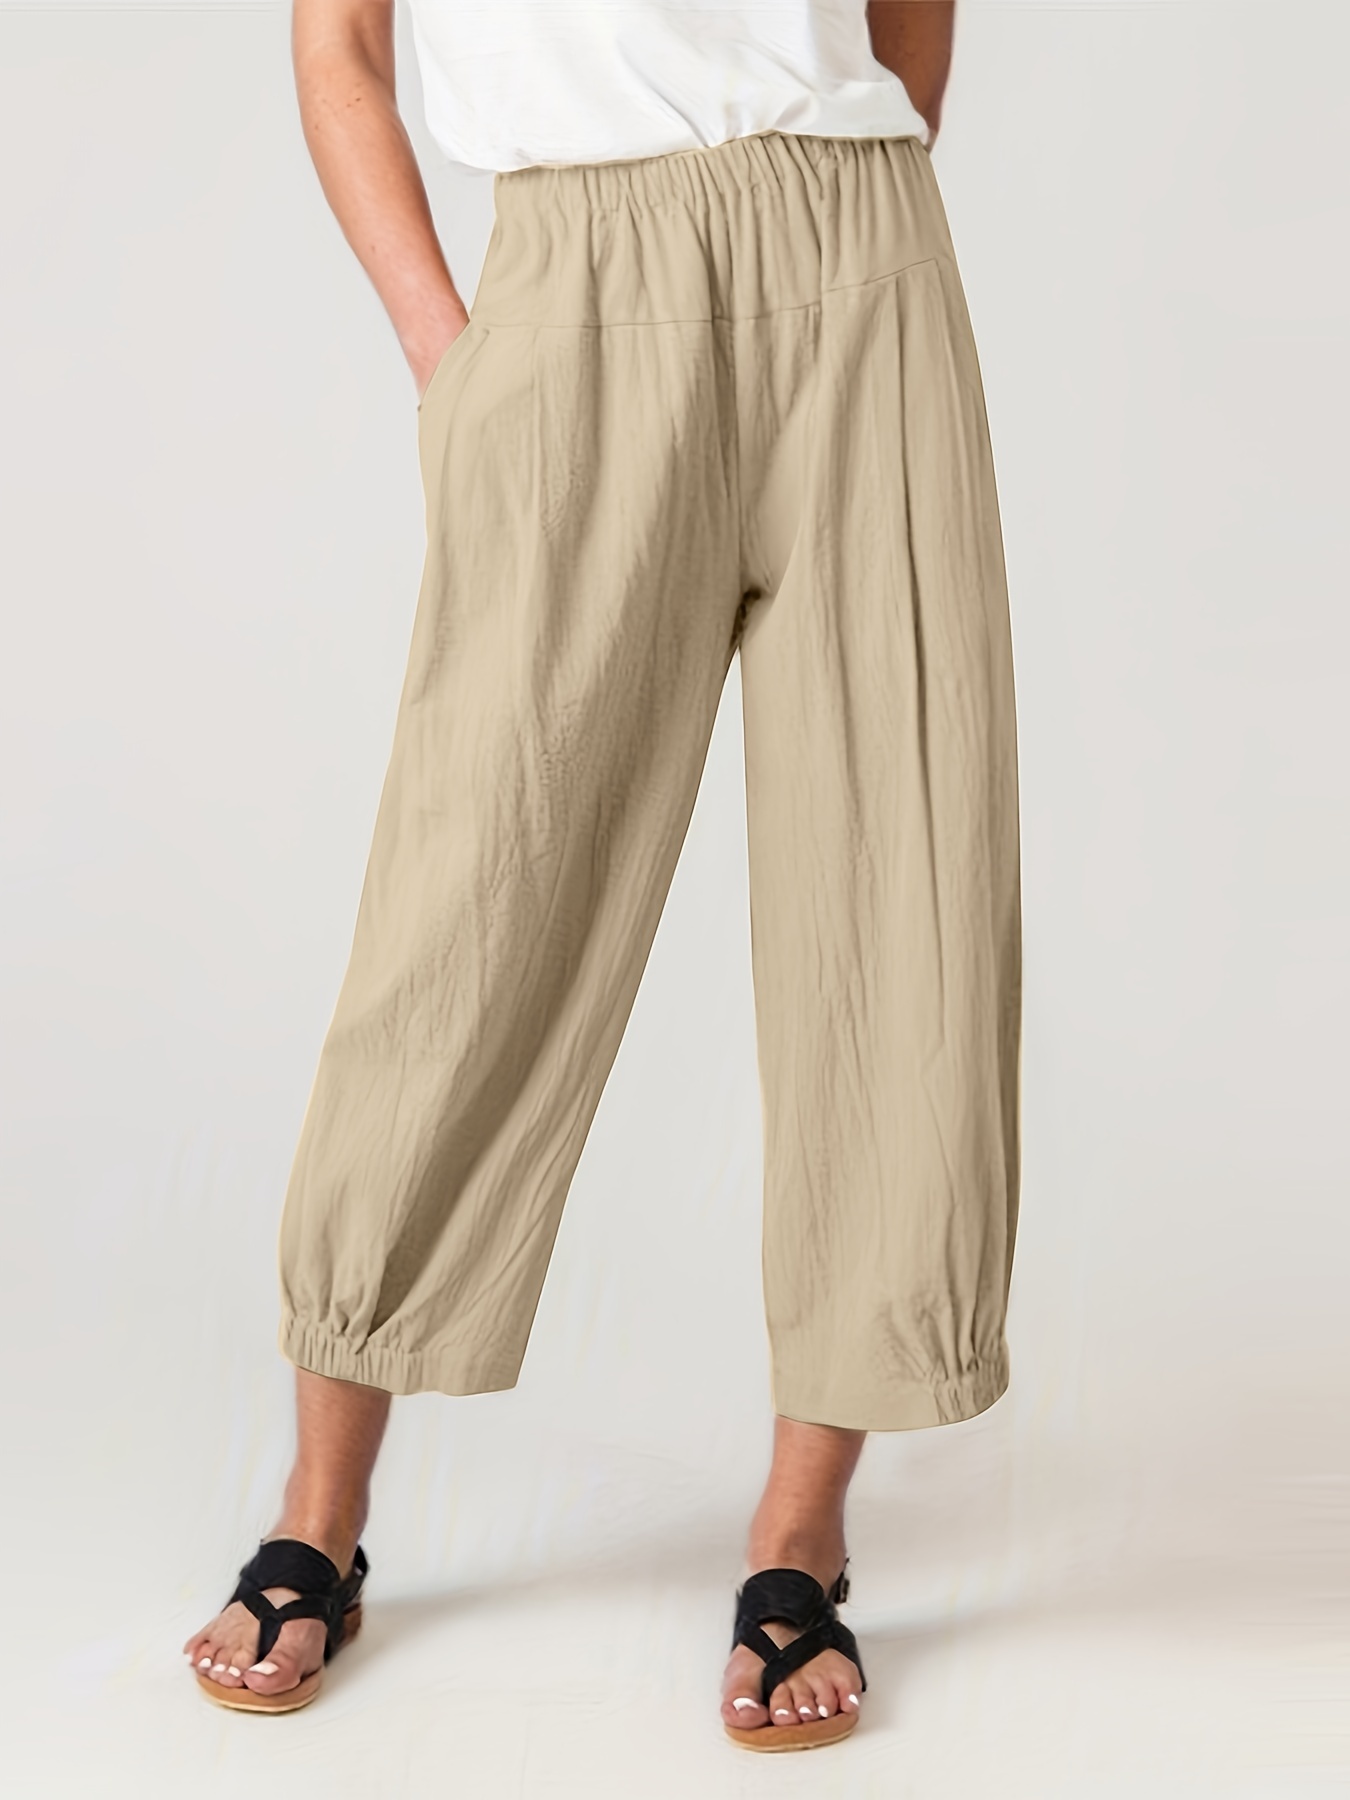 lcepcy Womens Cotton Linen Capri Pants - Wide Leg, Elastic Waist, Summer  Cropped Trousers for Beach and Casual Wear, Beige, Small : :  Clothing, Shoes & Accessories